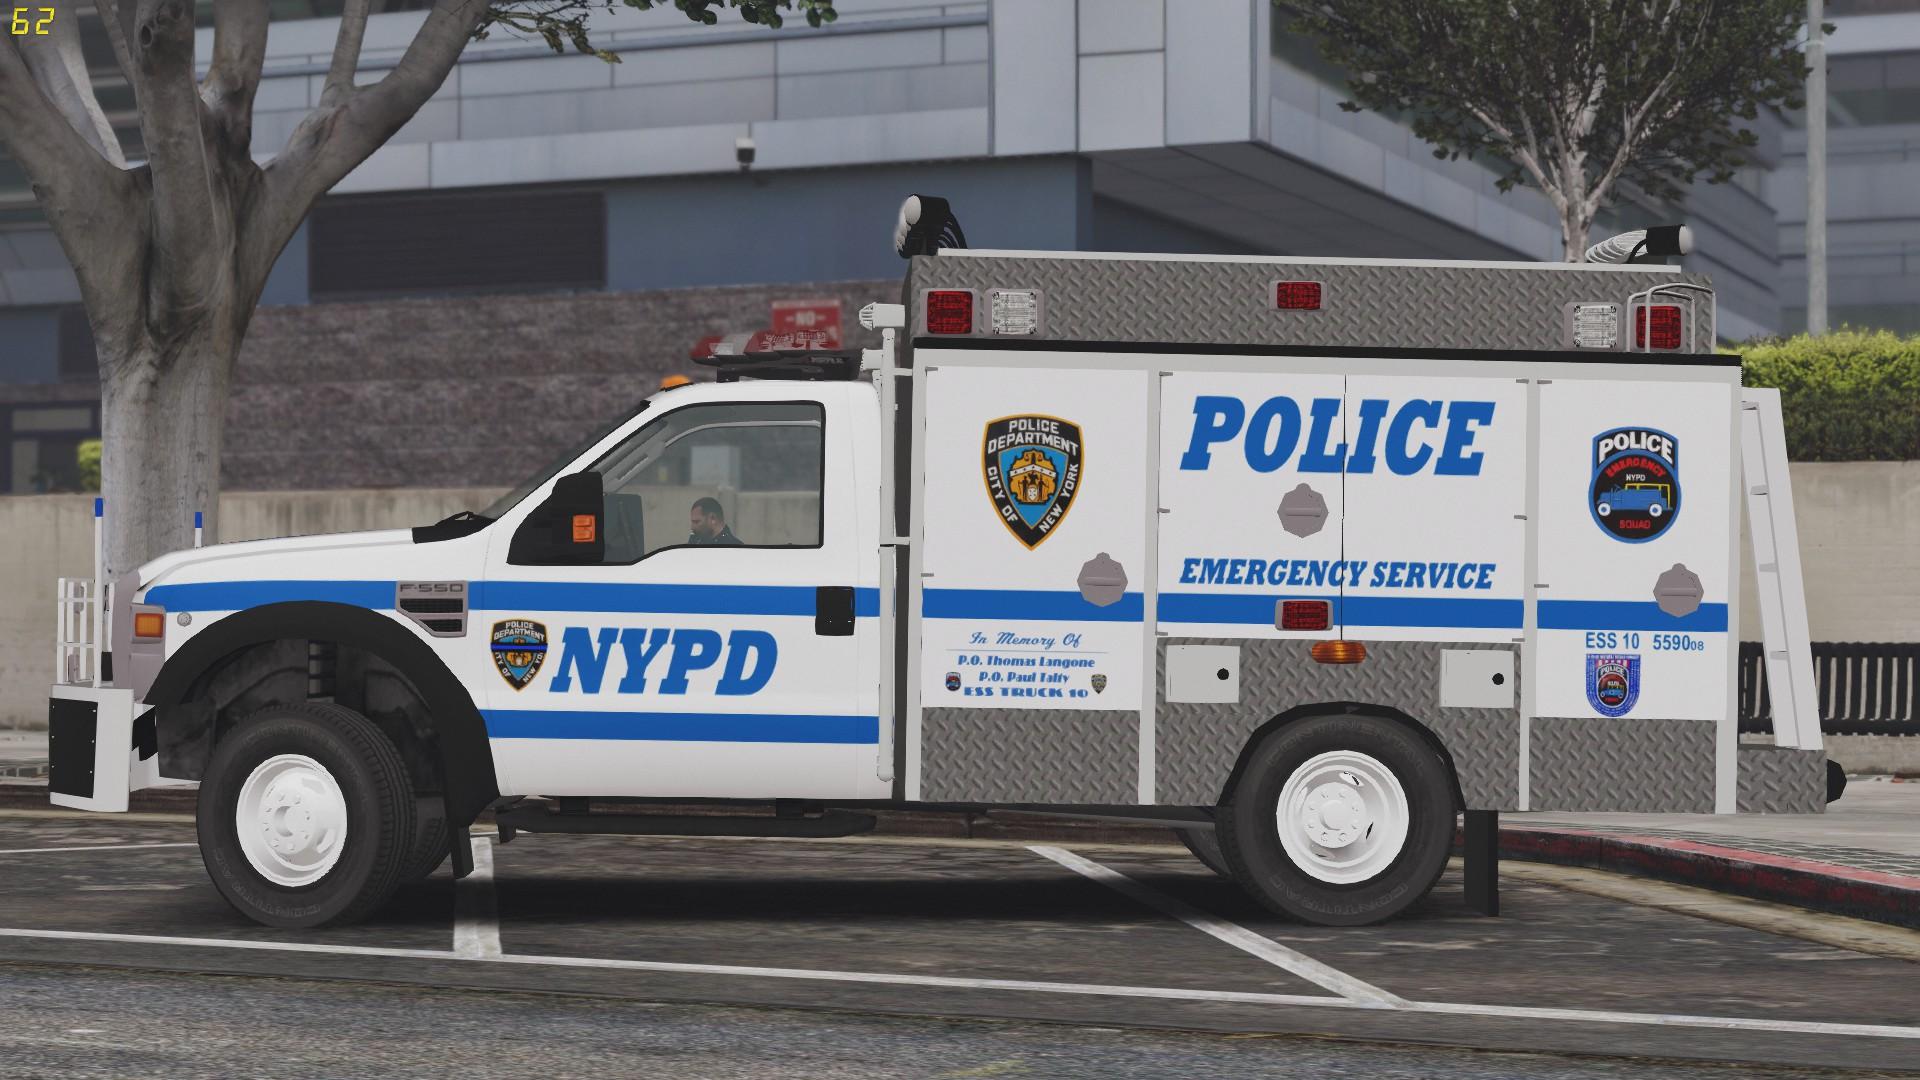 Грузовик полиция. Ford f550 NYPD. Полицейский грузовик NYPD Police. Ford f150 NYPD Police.